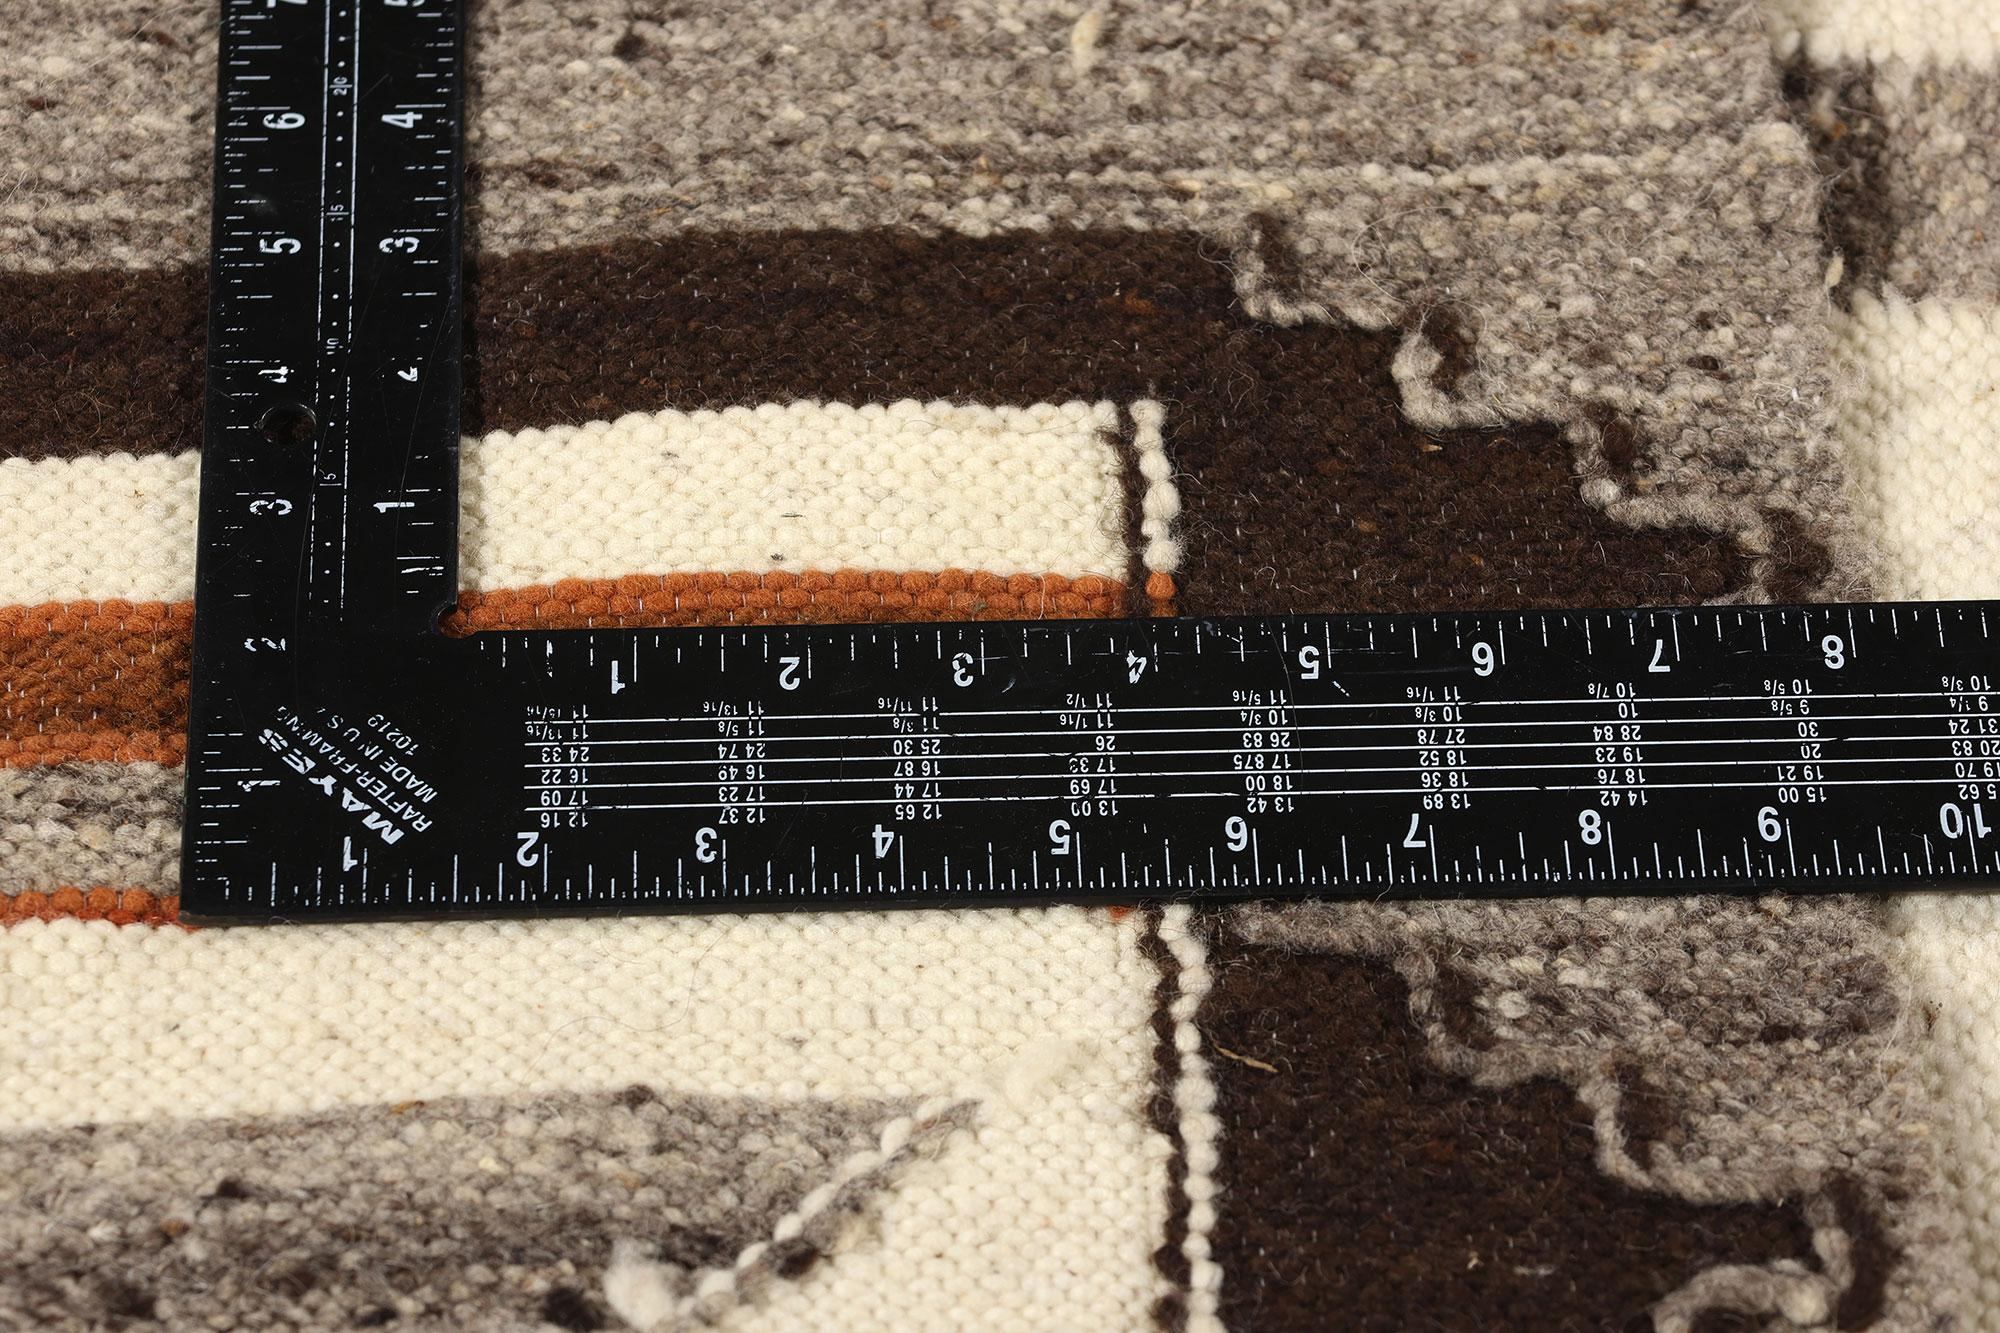 78755 Vintage Peruvian Bird Pictorial Kilim Rug, 03'11 x 05'04. Originating from Peru, South American Peruvian pictorial kilim rugs stand out as unique textiles that seamlessly fuse traditional Andean weaving methods with modern design